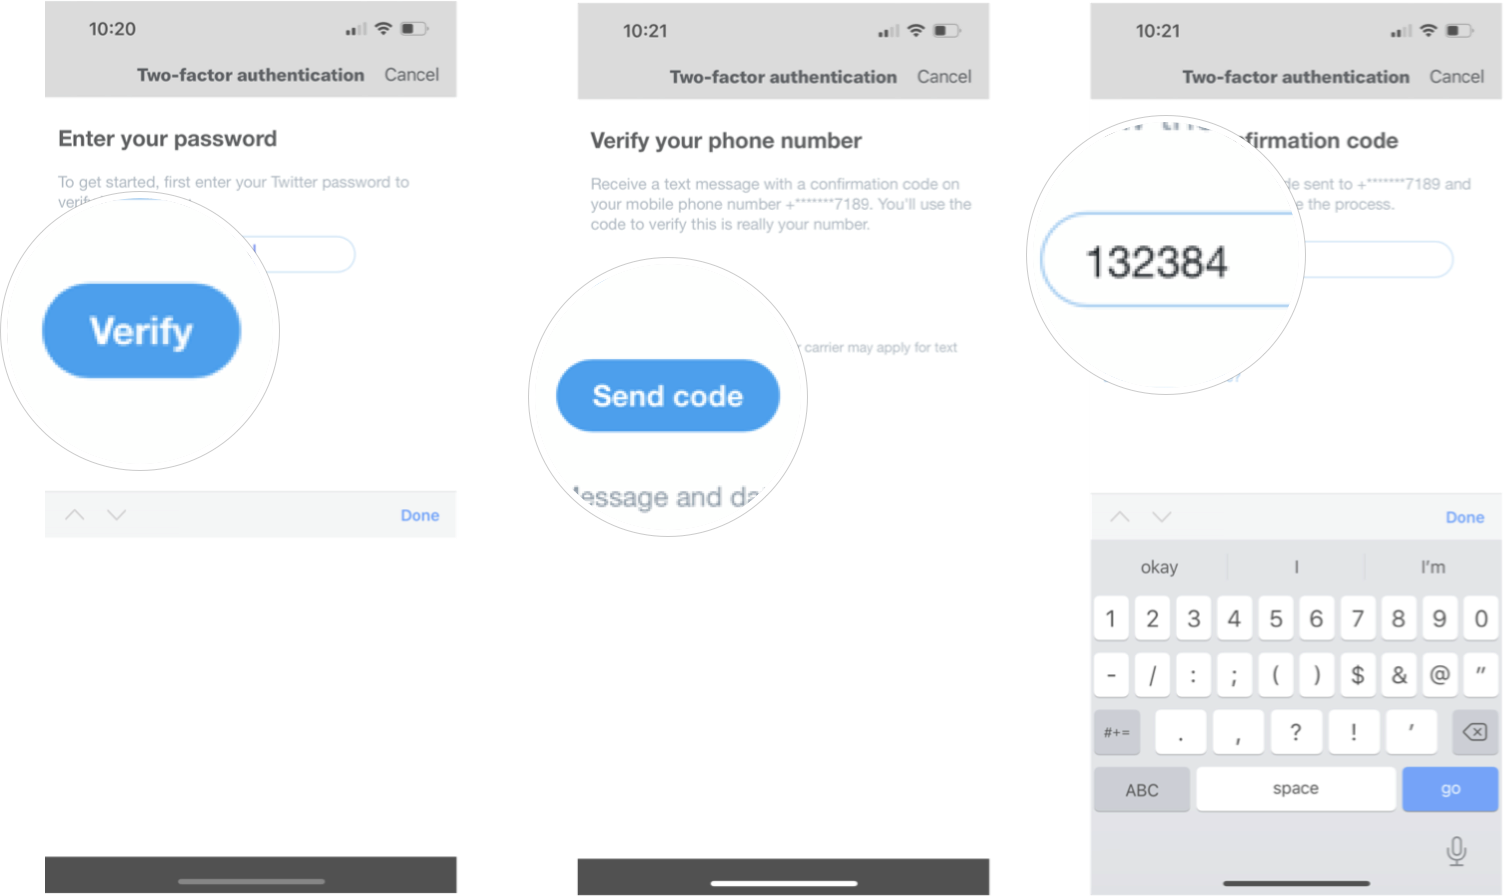 Setting Up 2FA With Text In Twitter In iOS 15: Tap verify, tap send code, and then enter the confirmation code. 